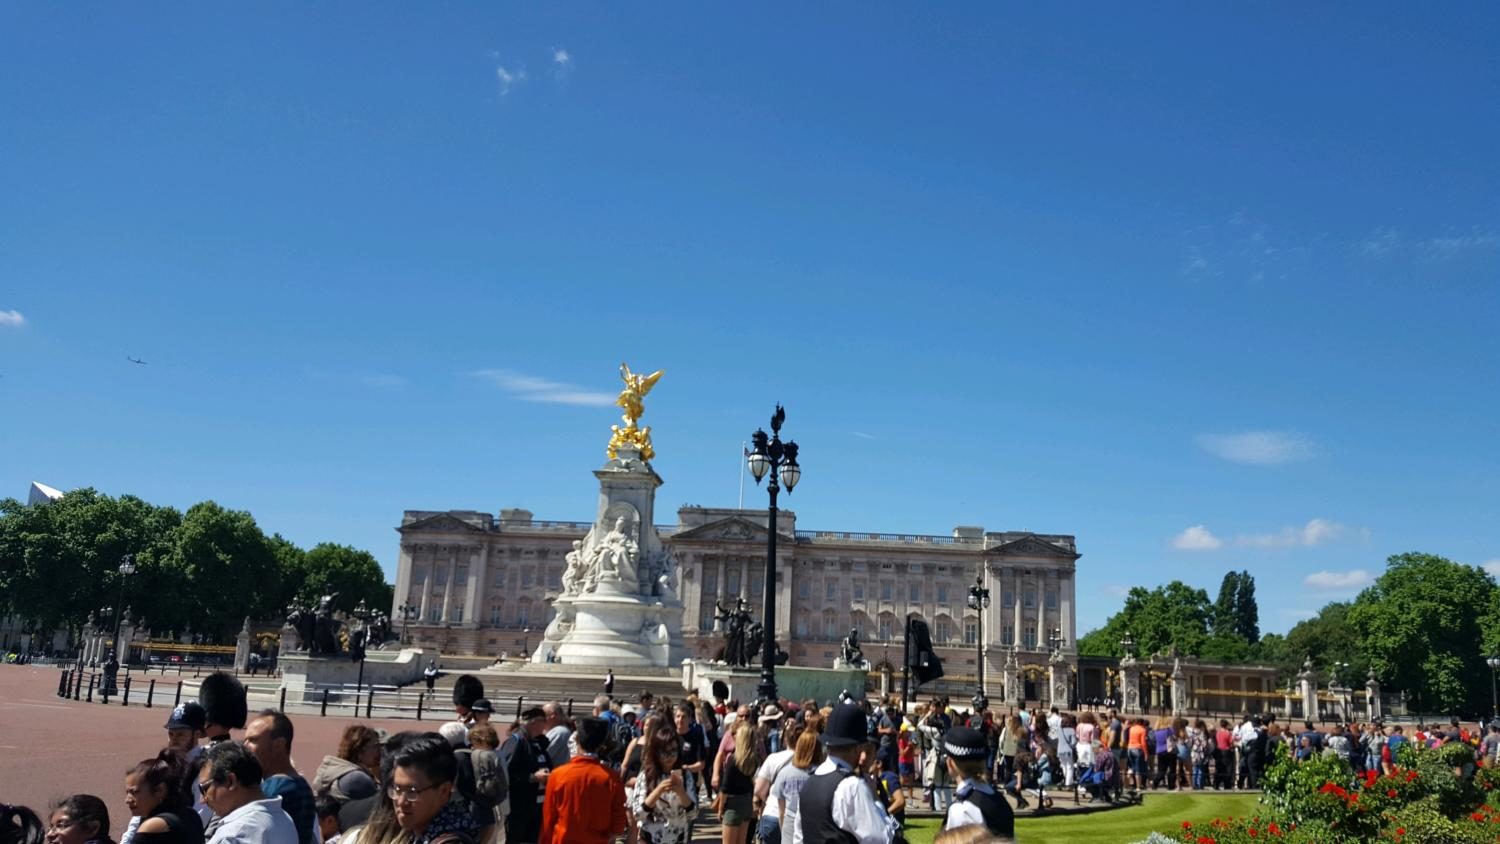 The Culture Club visits Buckingham Palace in London.